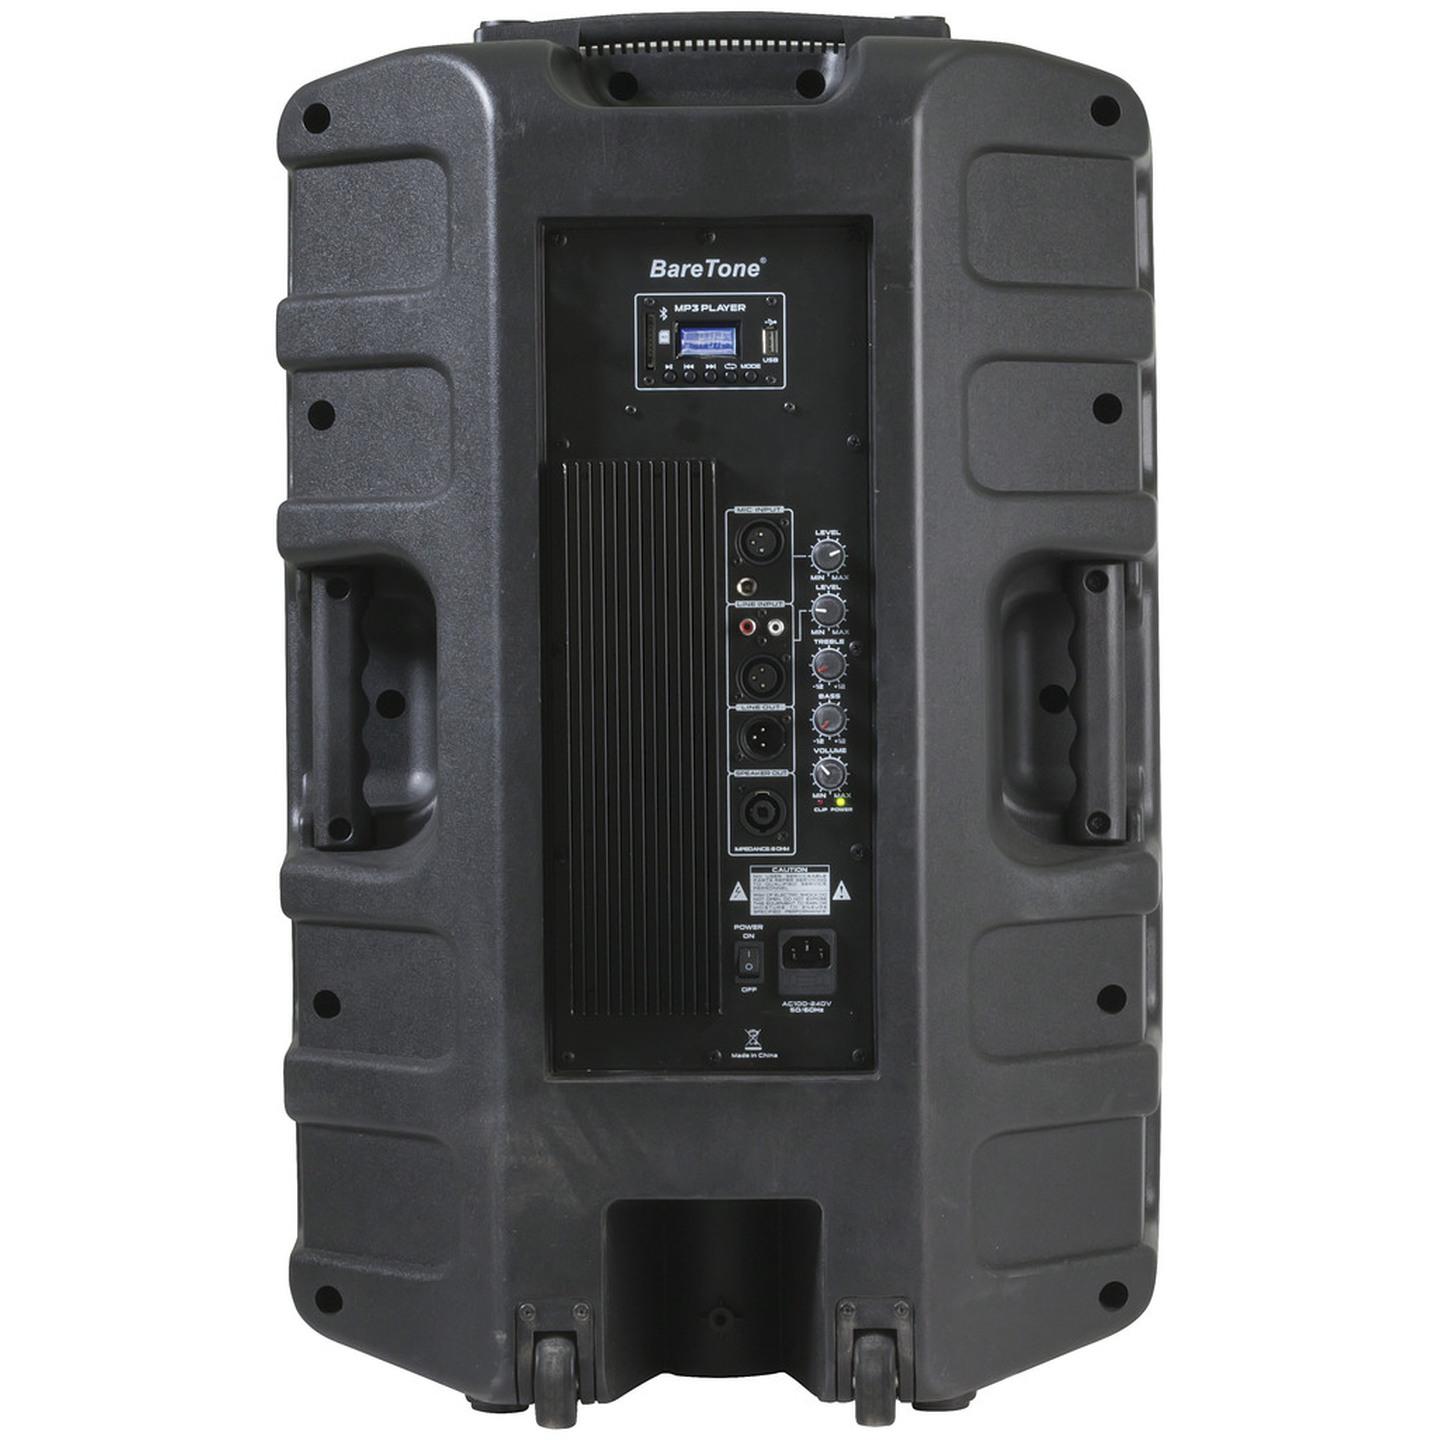 15 Inch PA System with Two Wireless UHF Microphones